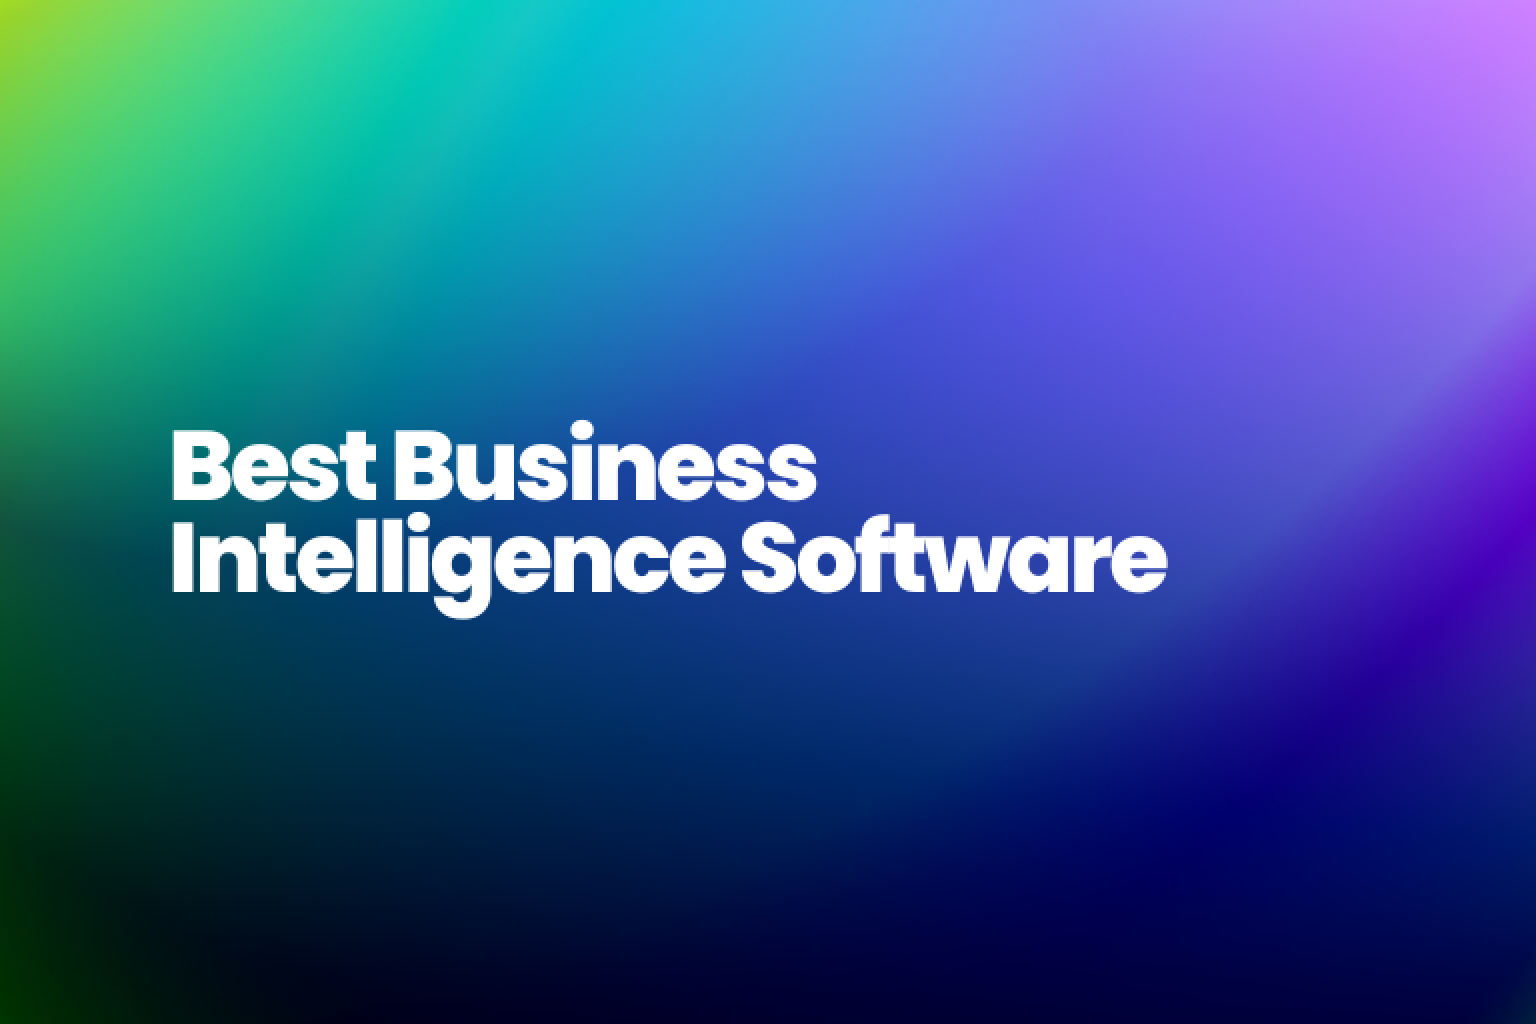 Discover the best business intelligence tools for data-driven decision-making, with insights on top Business Intelligence vendors like Power BI, Tableau, and RATH.